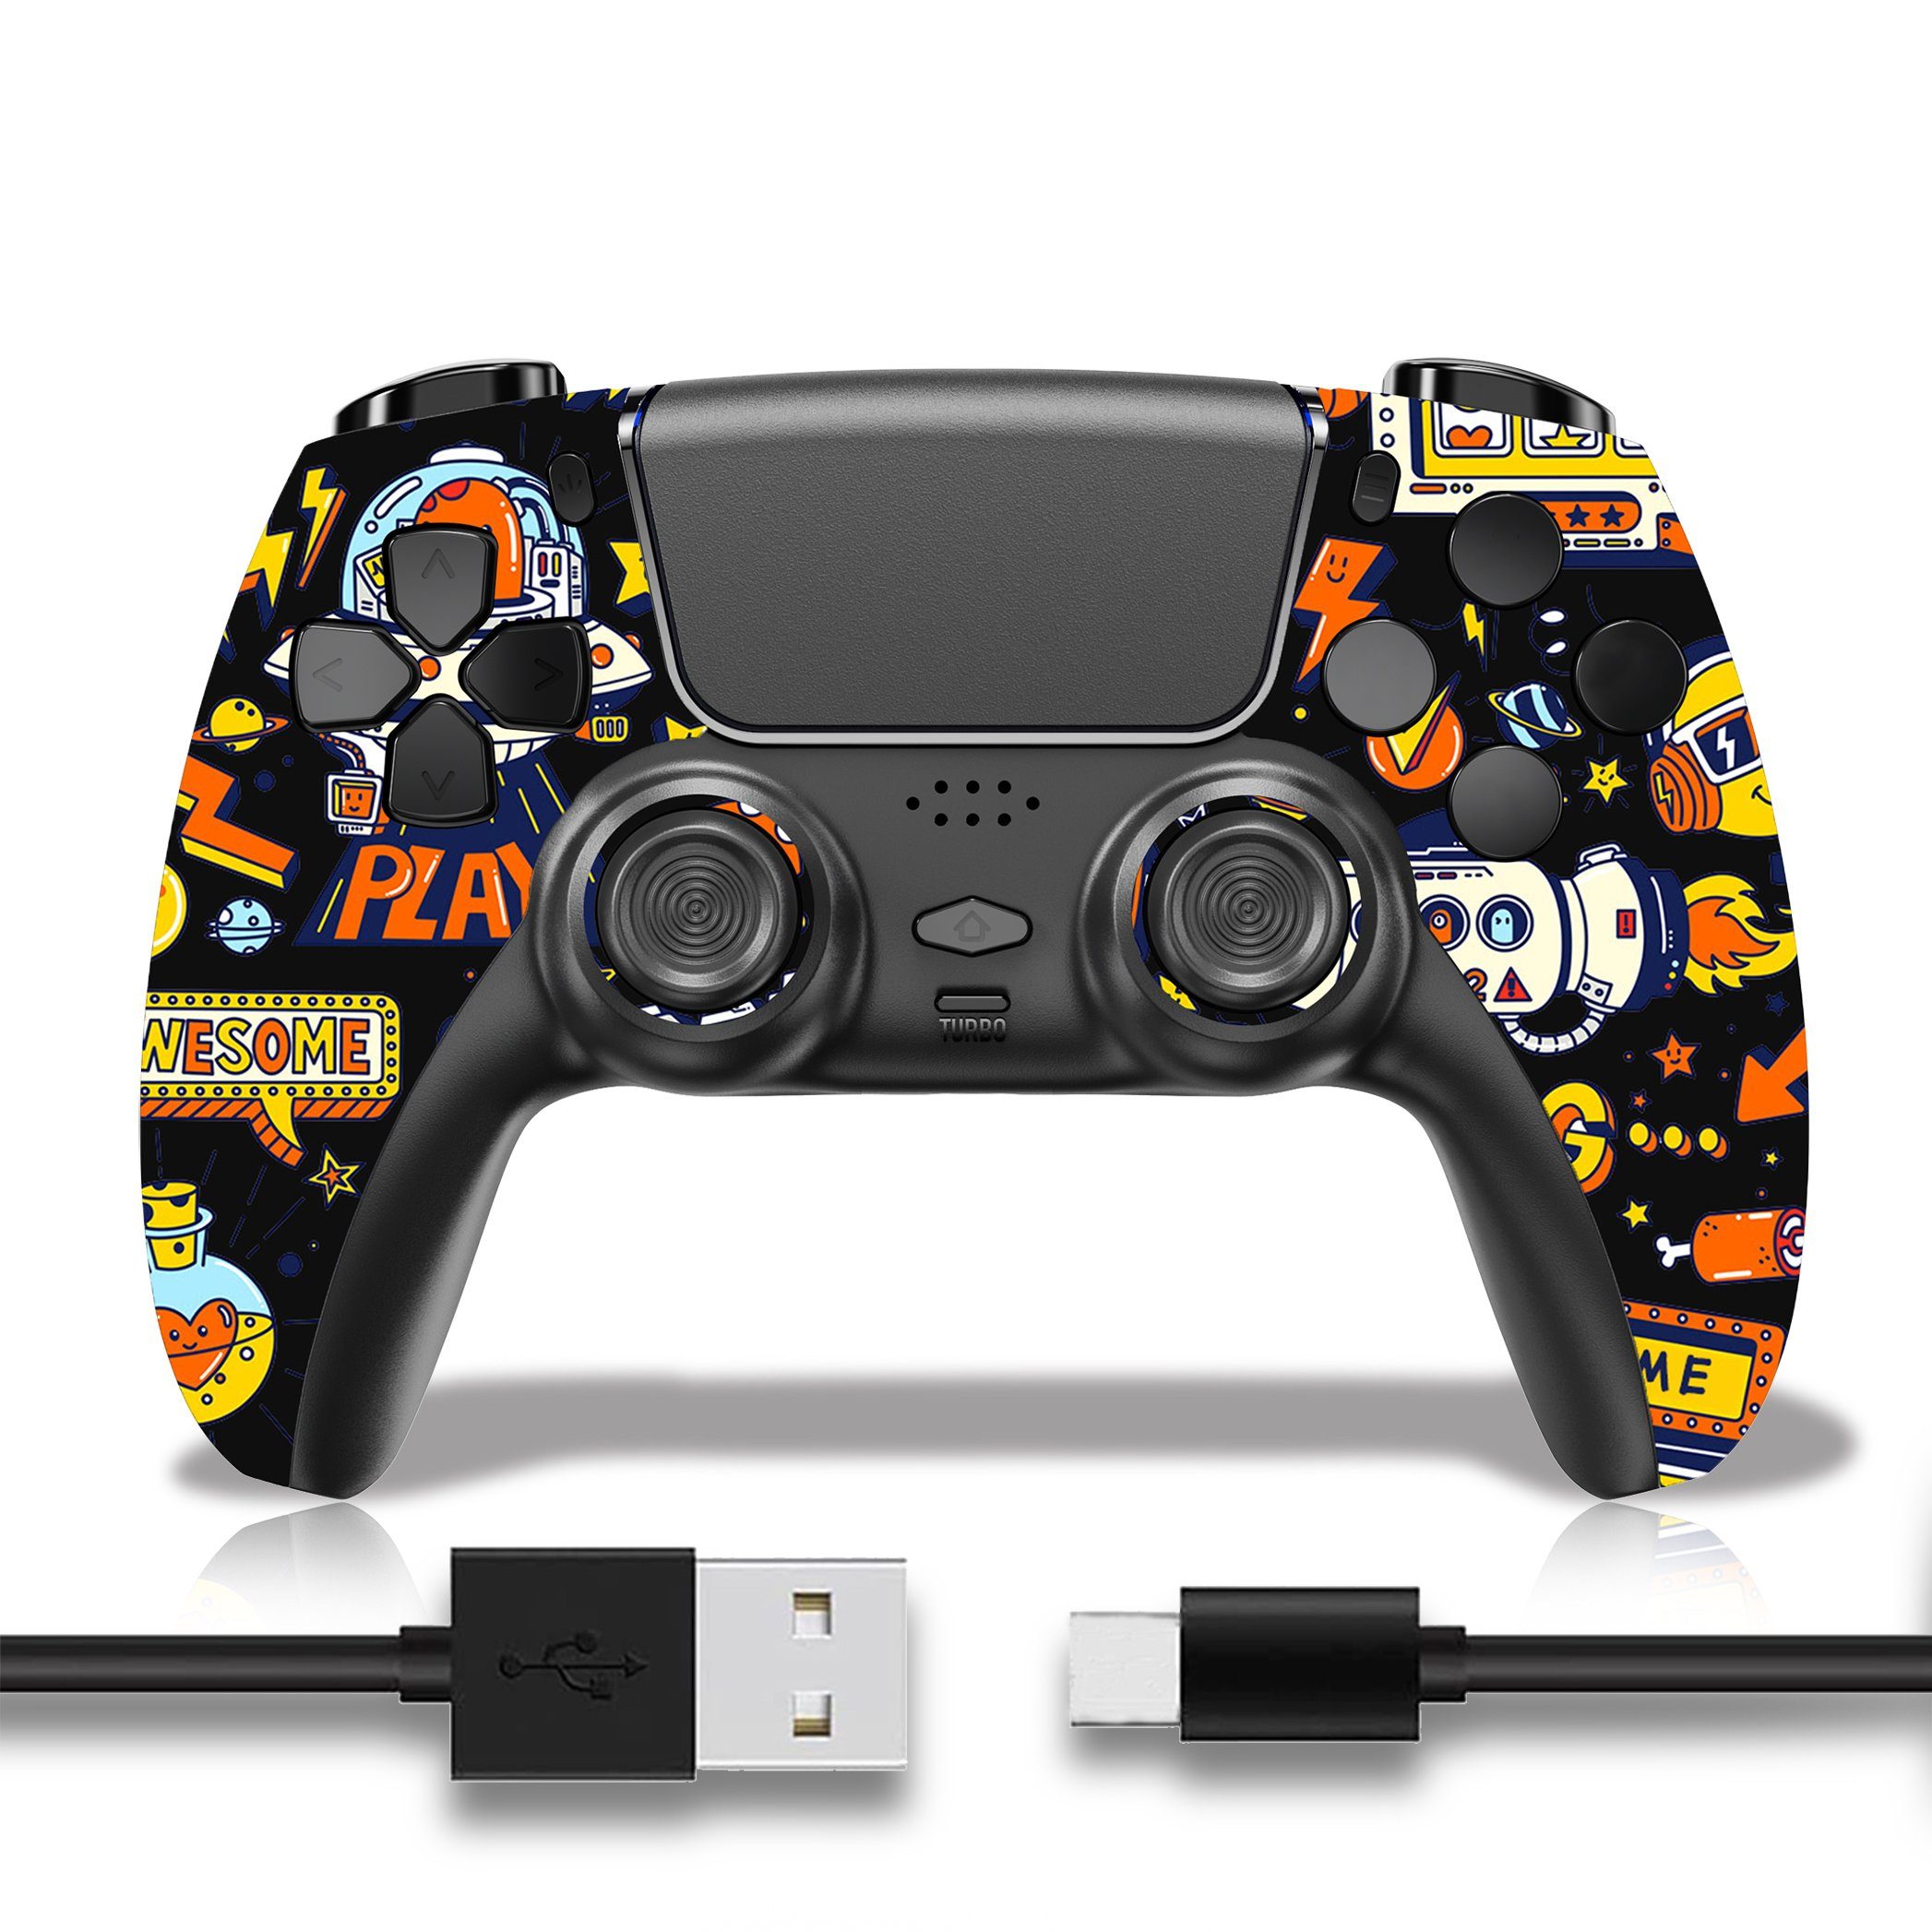 Tadow Wireless Gamepad, Controller, für PS4, Bluetooth, Retro-Maschine  PlayStation 4-Controller (kompatibel mit PS3/PS4/SWITCH /Android/IOS/PC/TV-Box)